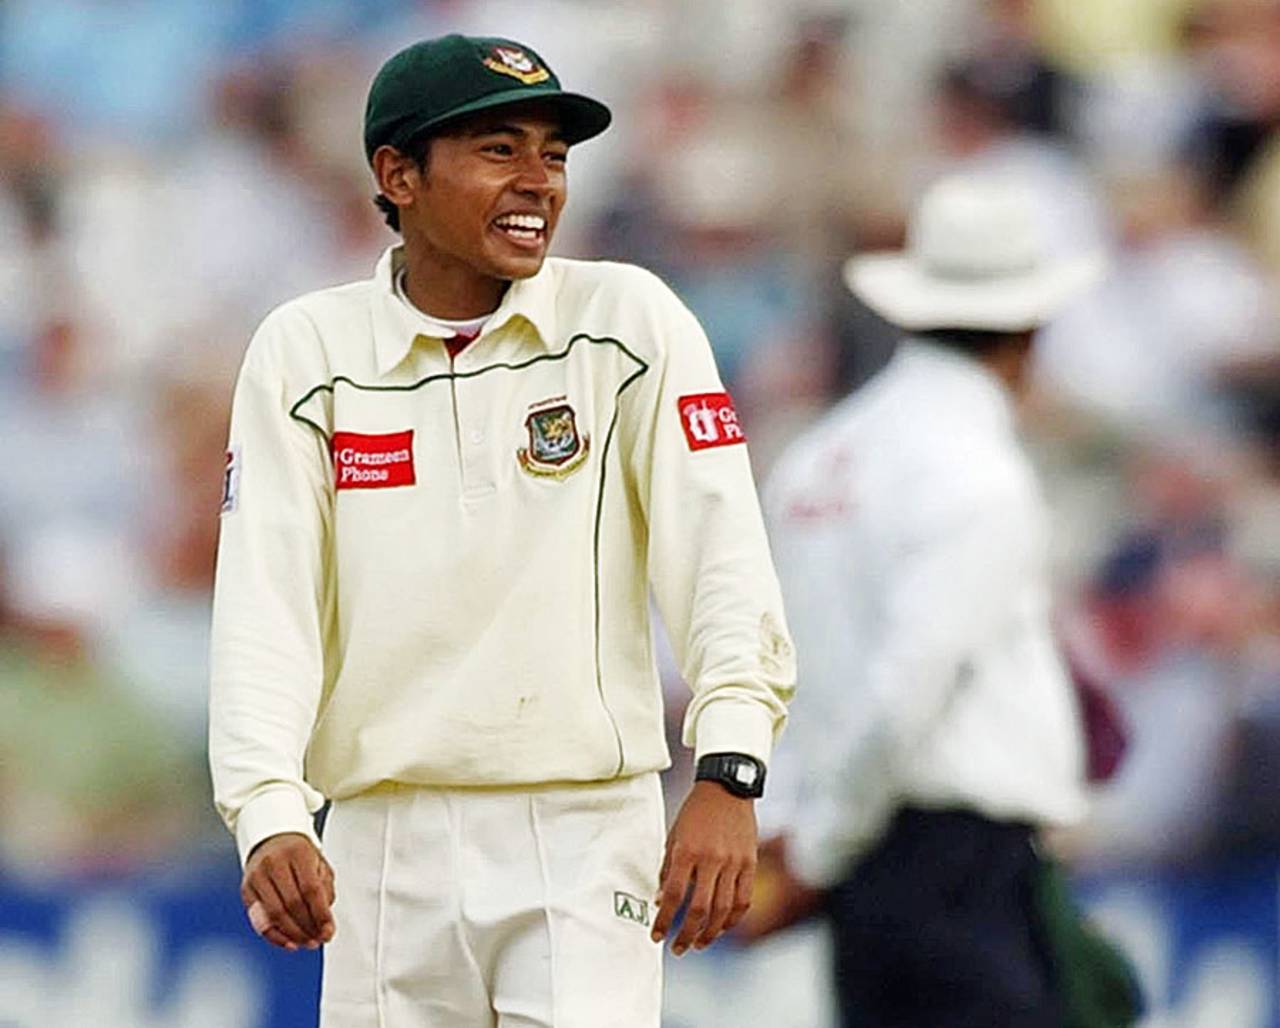 Mushfiqur Rahim soaks in his debut Test, England v Bangladesh, 1st Test, 1st day, Lord's, May 26, 2005